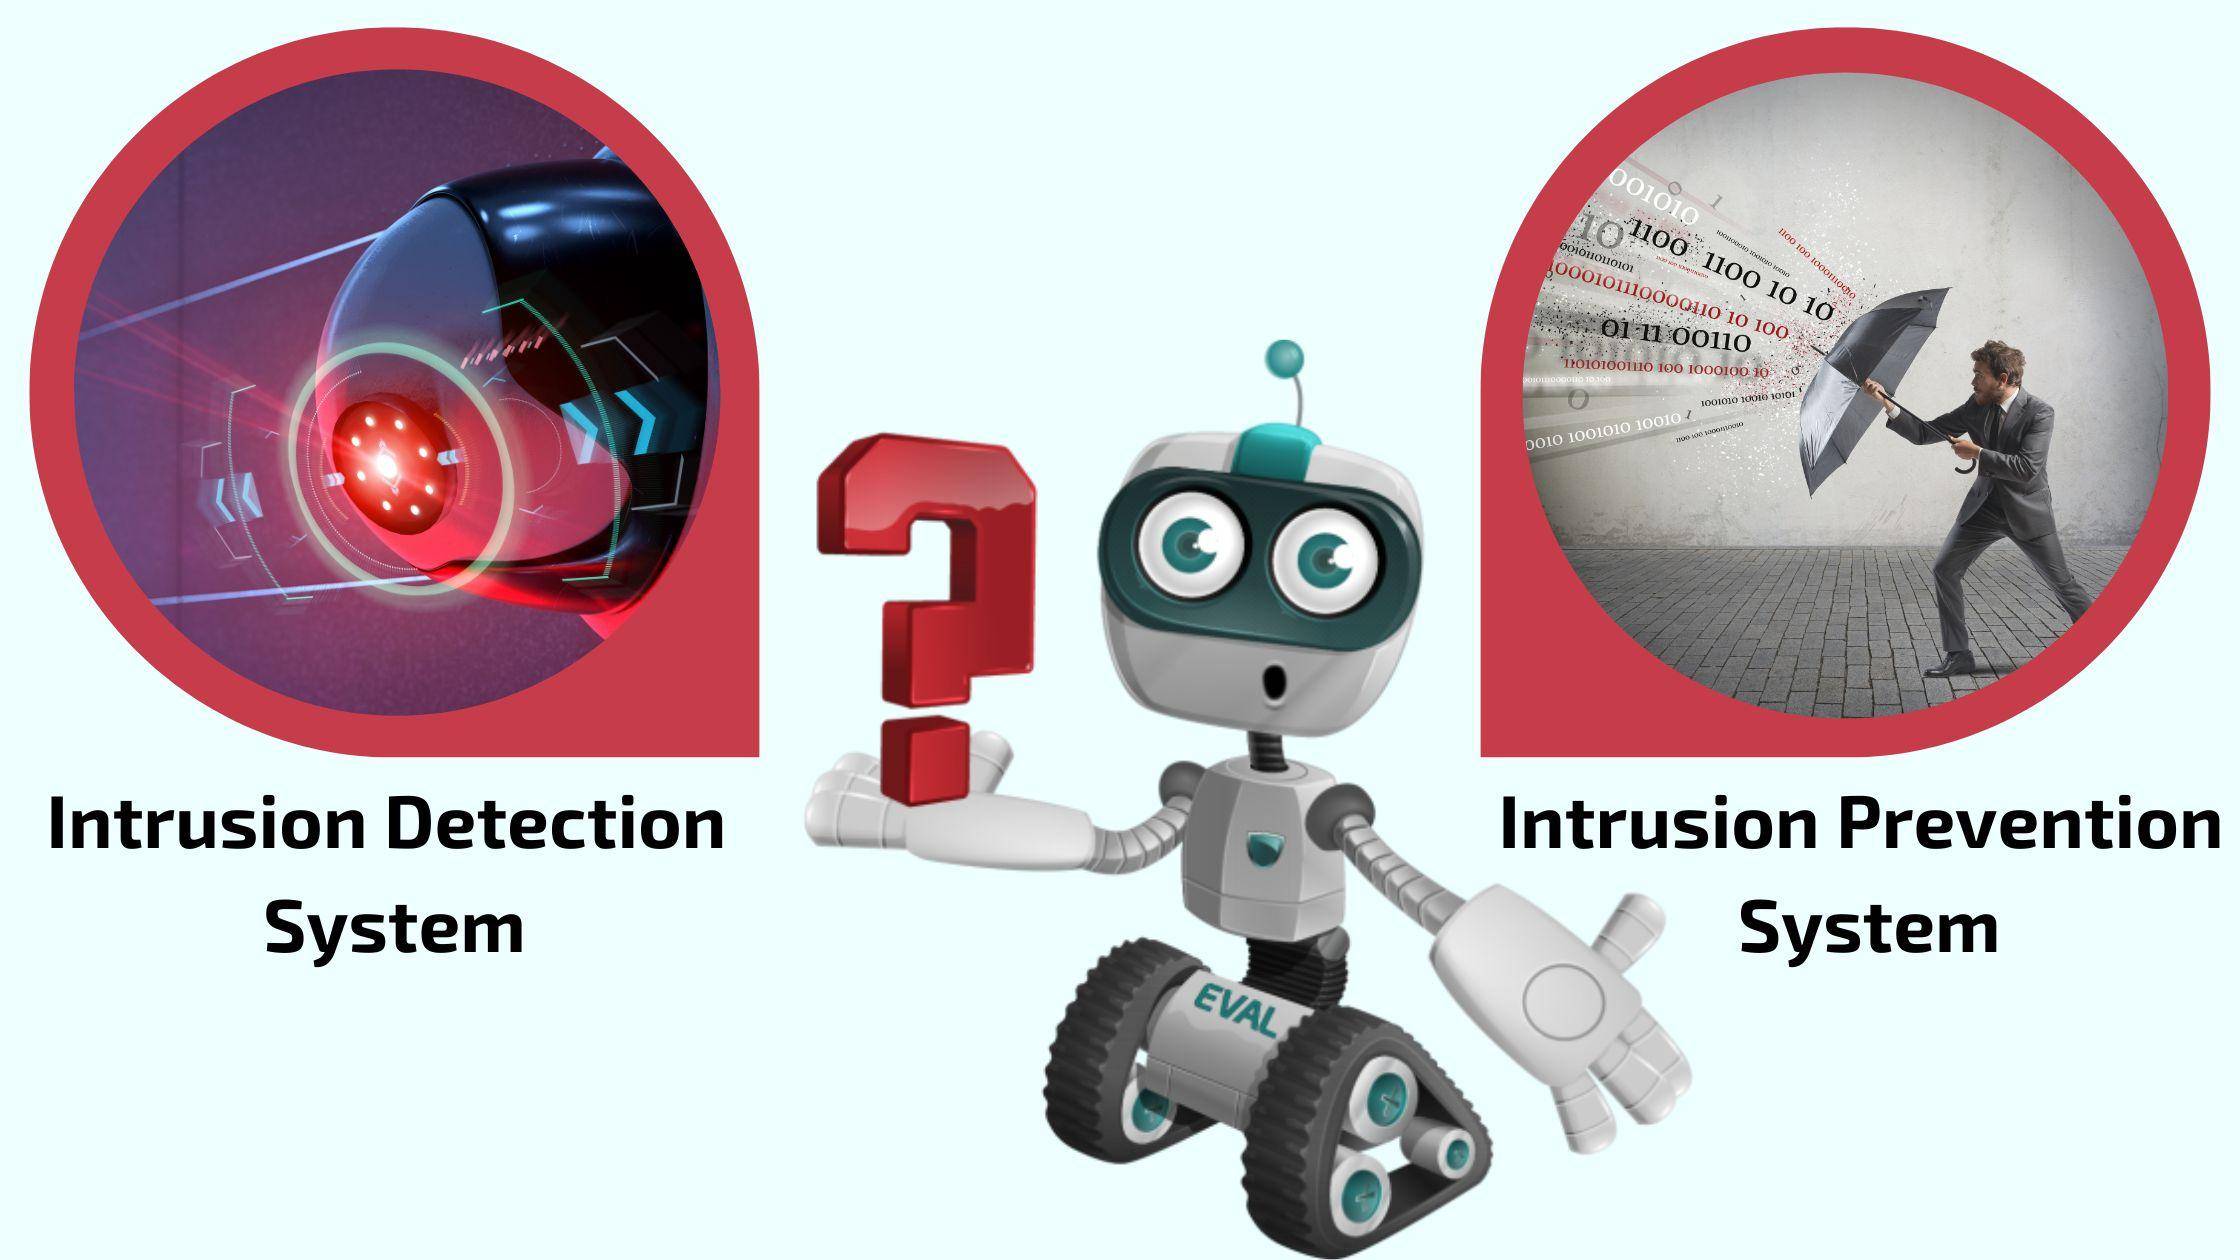 Intrusion Detection System [IDS] vs Intrusion Prevention System [IPS]